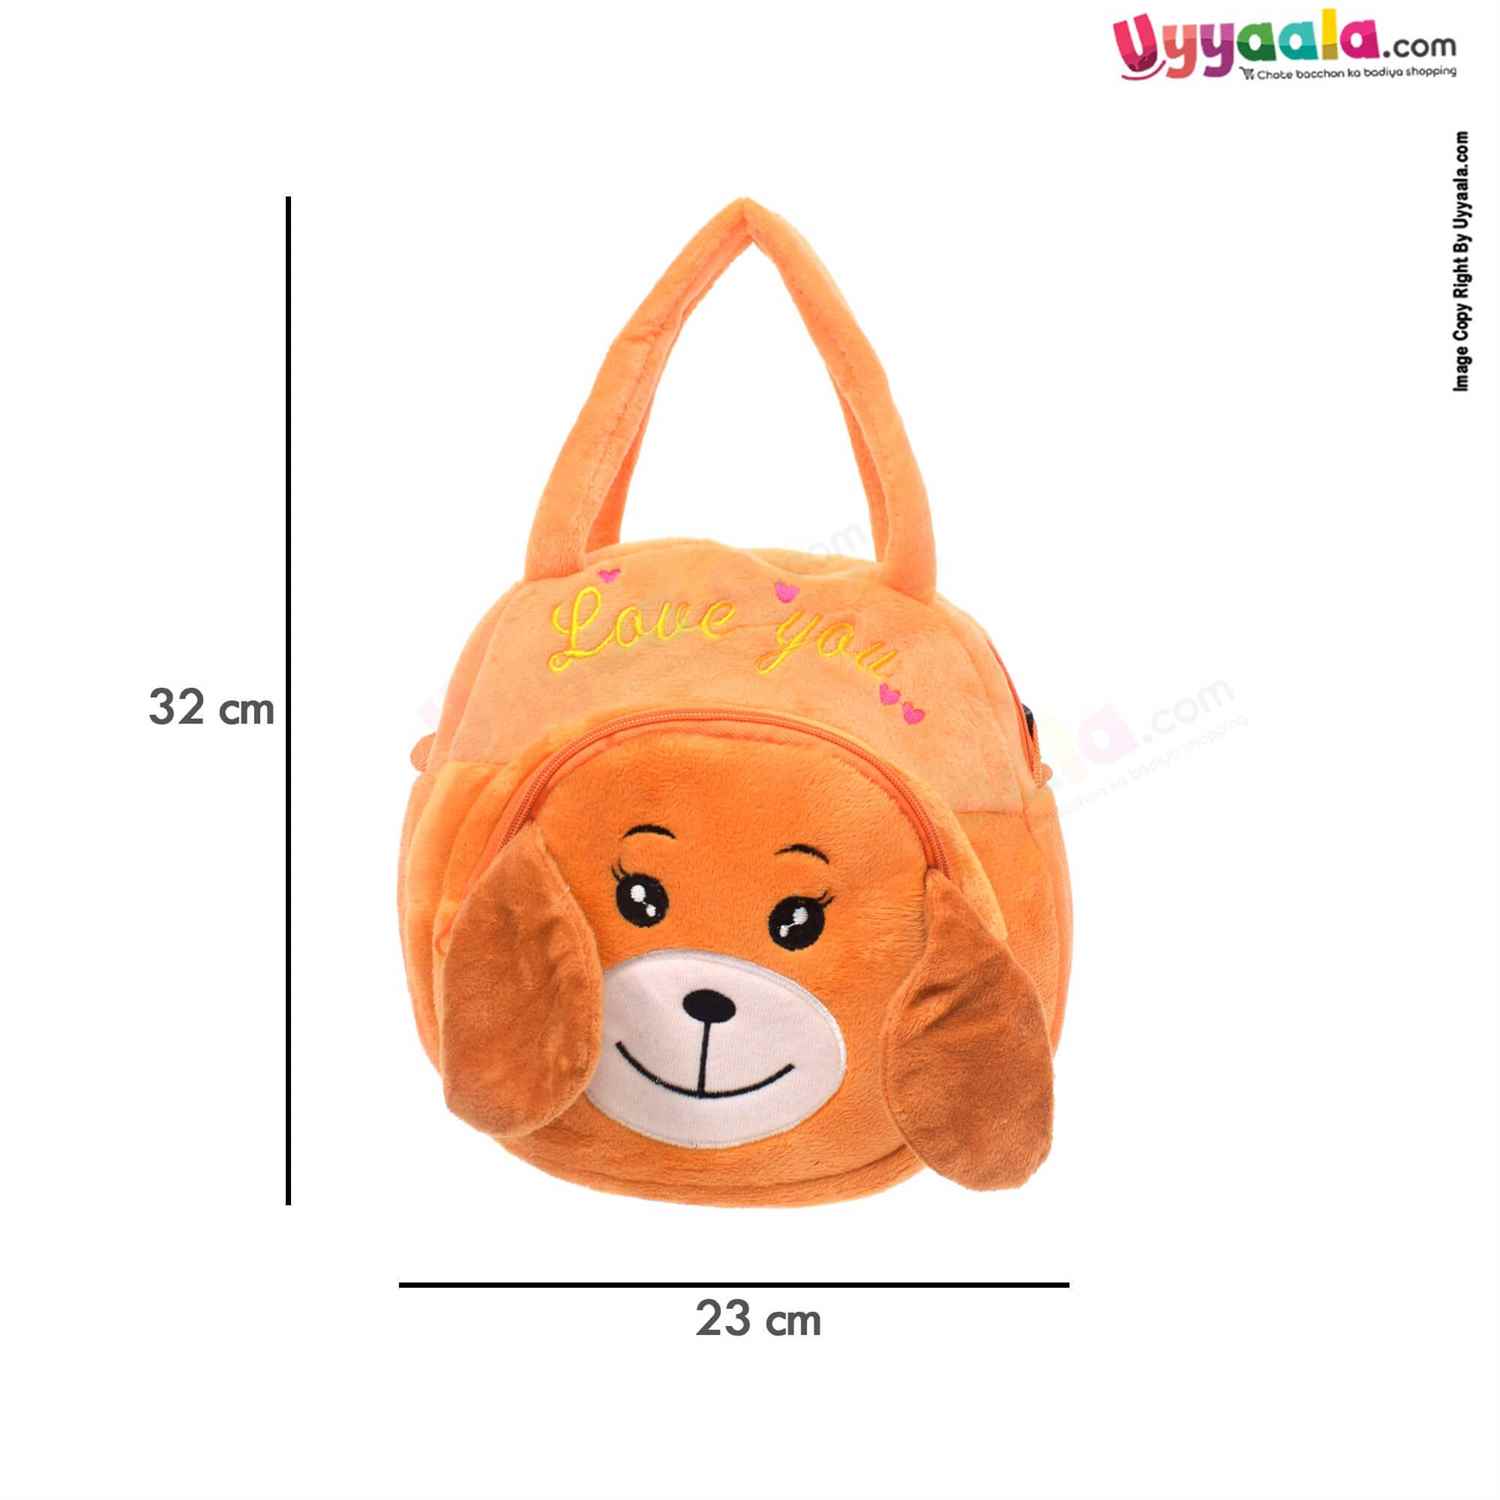 Doggy Themed Soft Hand Bag for Kids - Orange, Brown